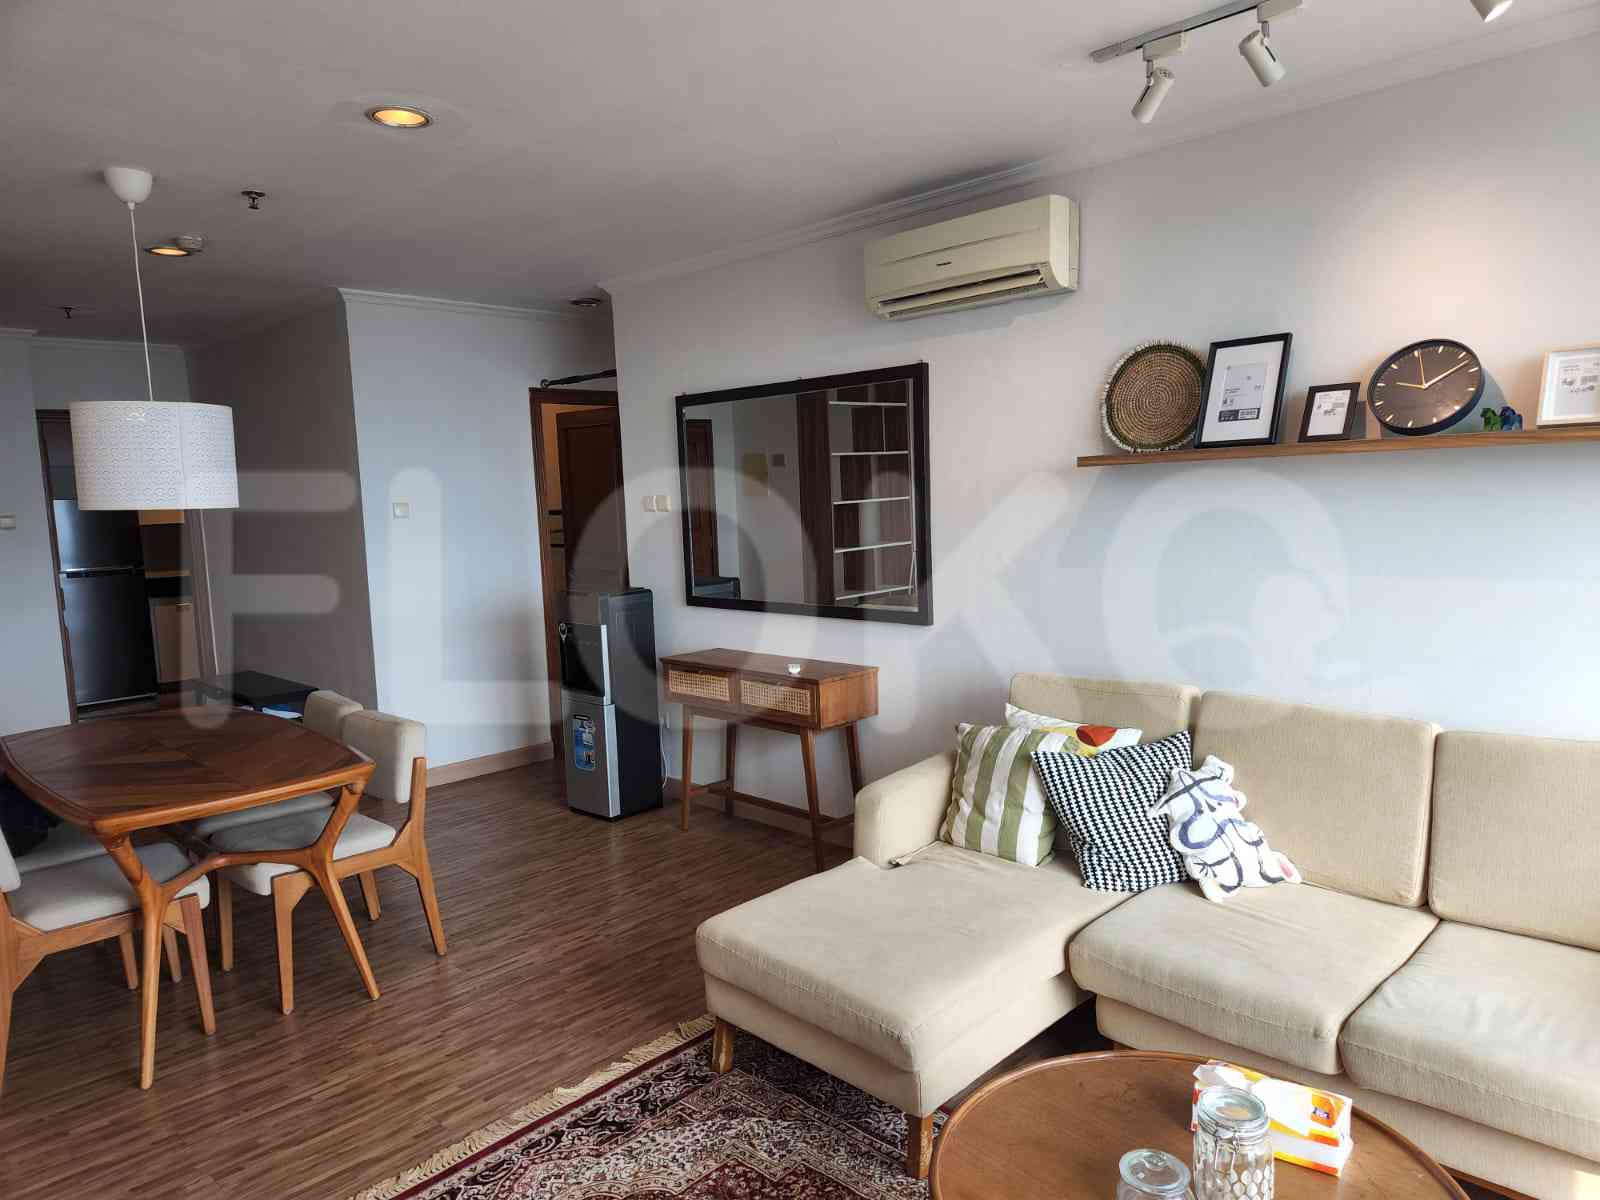 2 Bedroom on 16th Floor for Rent in Bumi Mas Apartment - ffa079 2